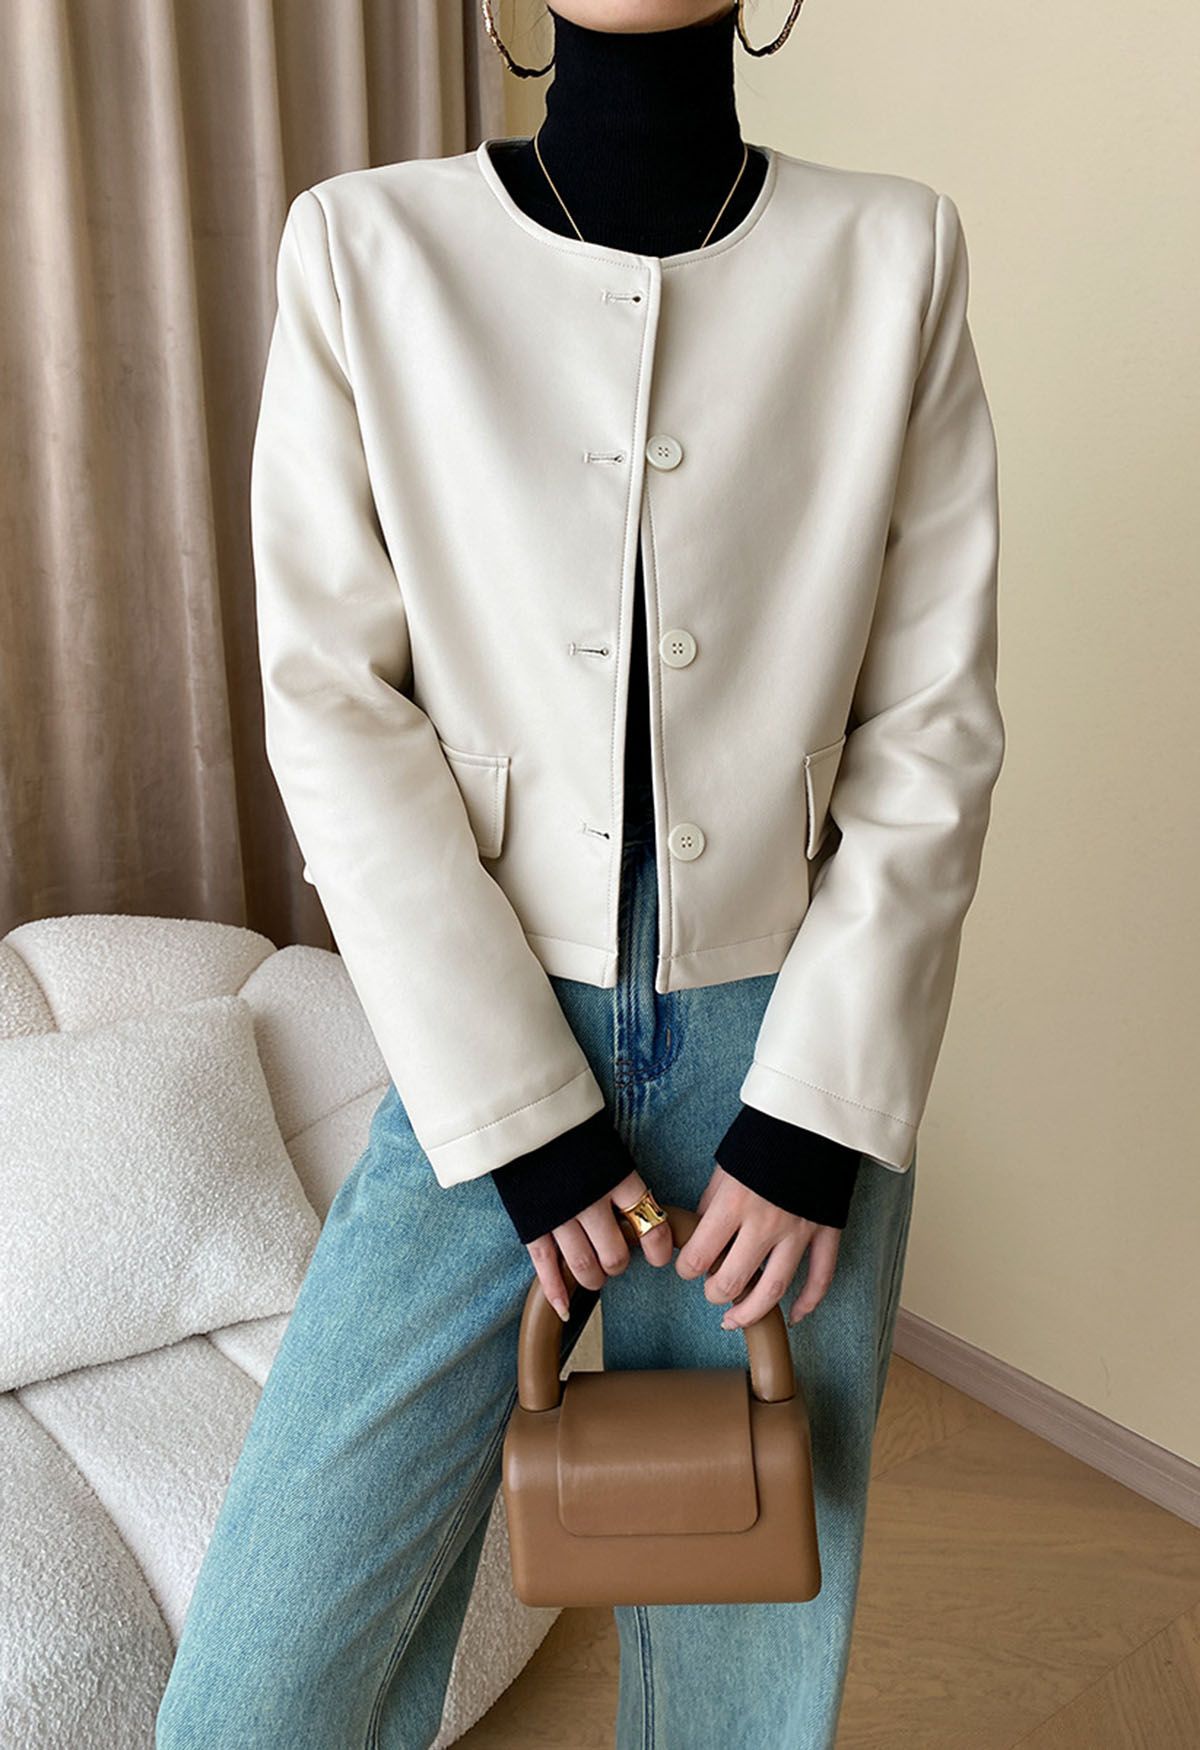 Faux Leather Buttoned Cropped Jacket in Cream